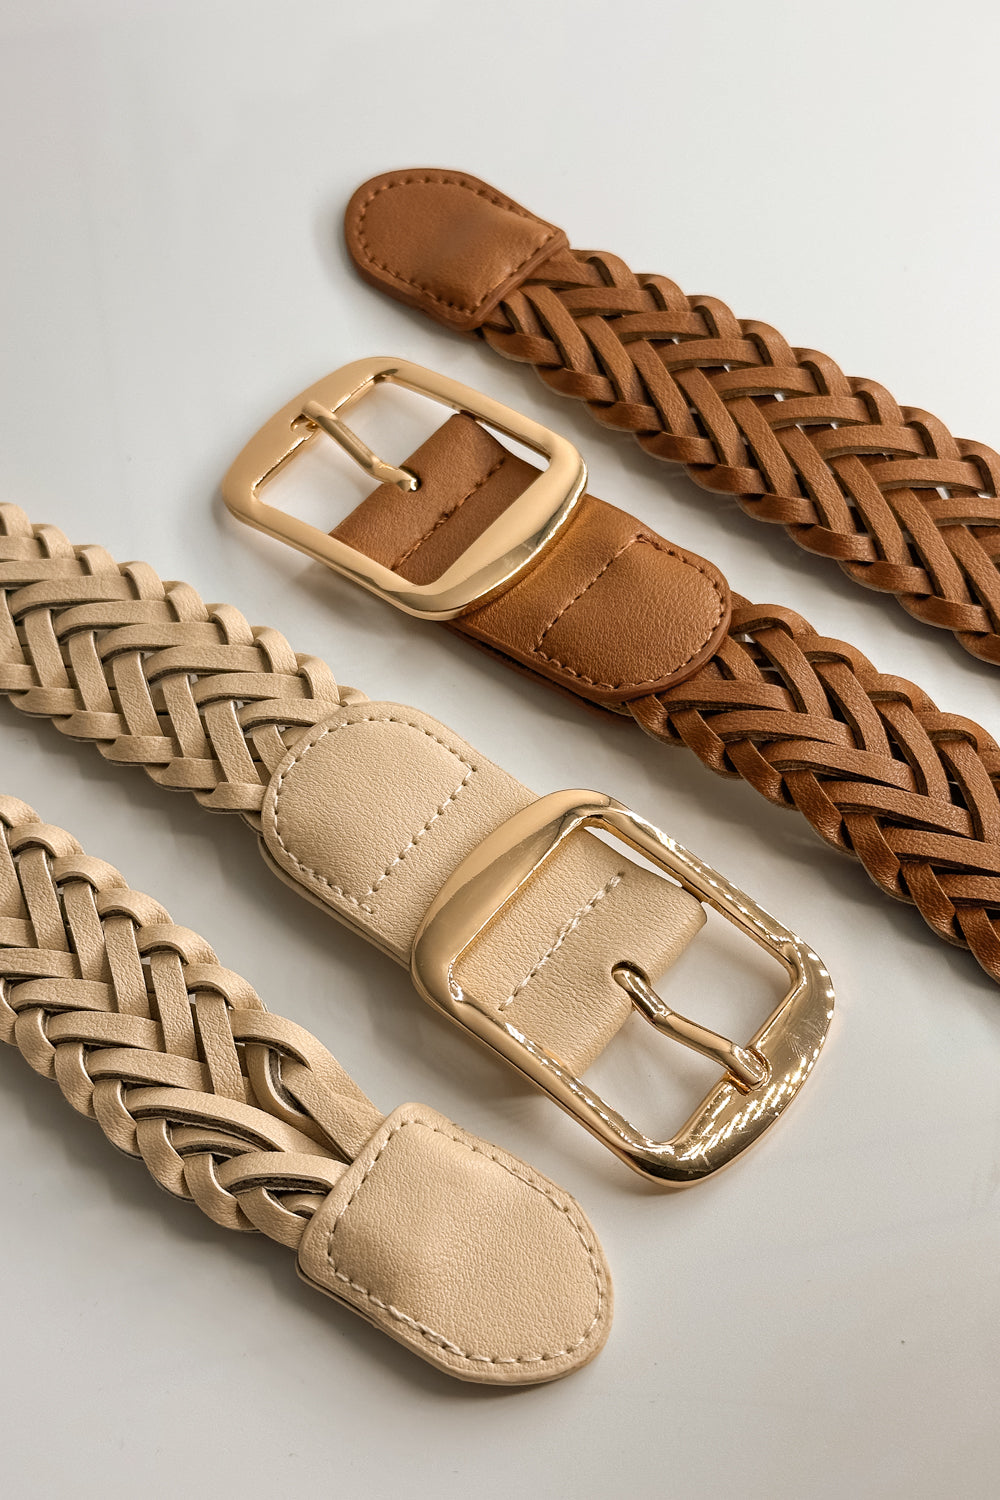 Flat lay view of the Everly Braided Adjustable Belt in Brown and Ivory which features Leather Fabric, Braided Details, Gold Adjustable Buckle